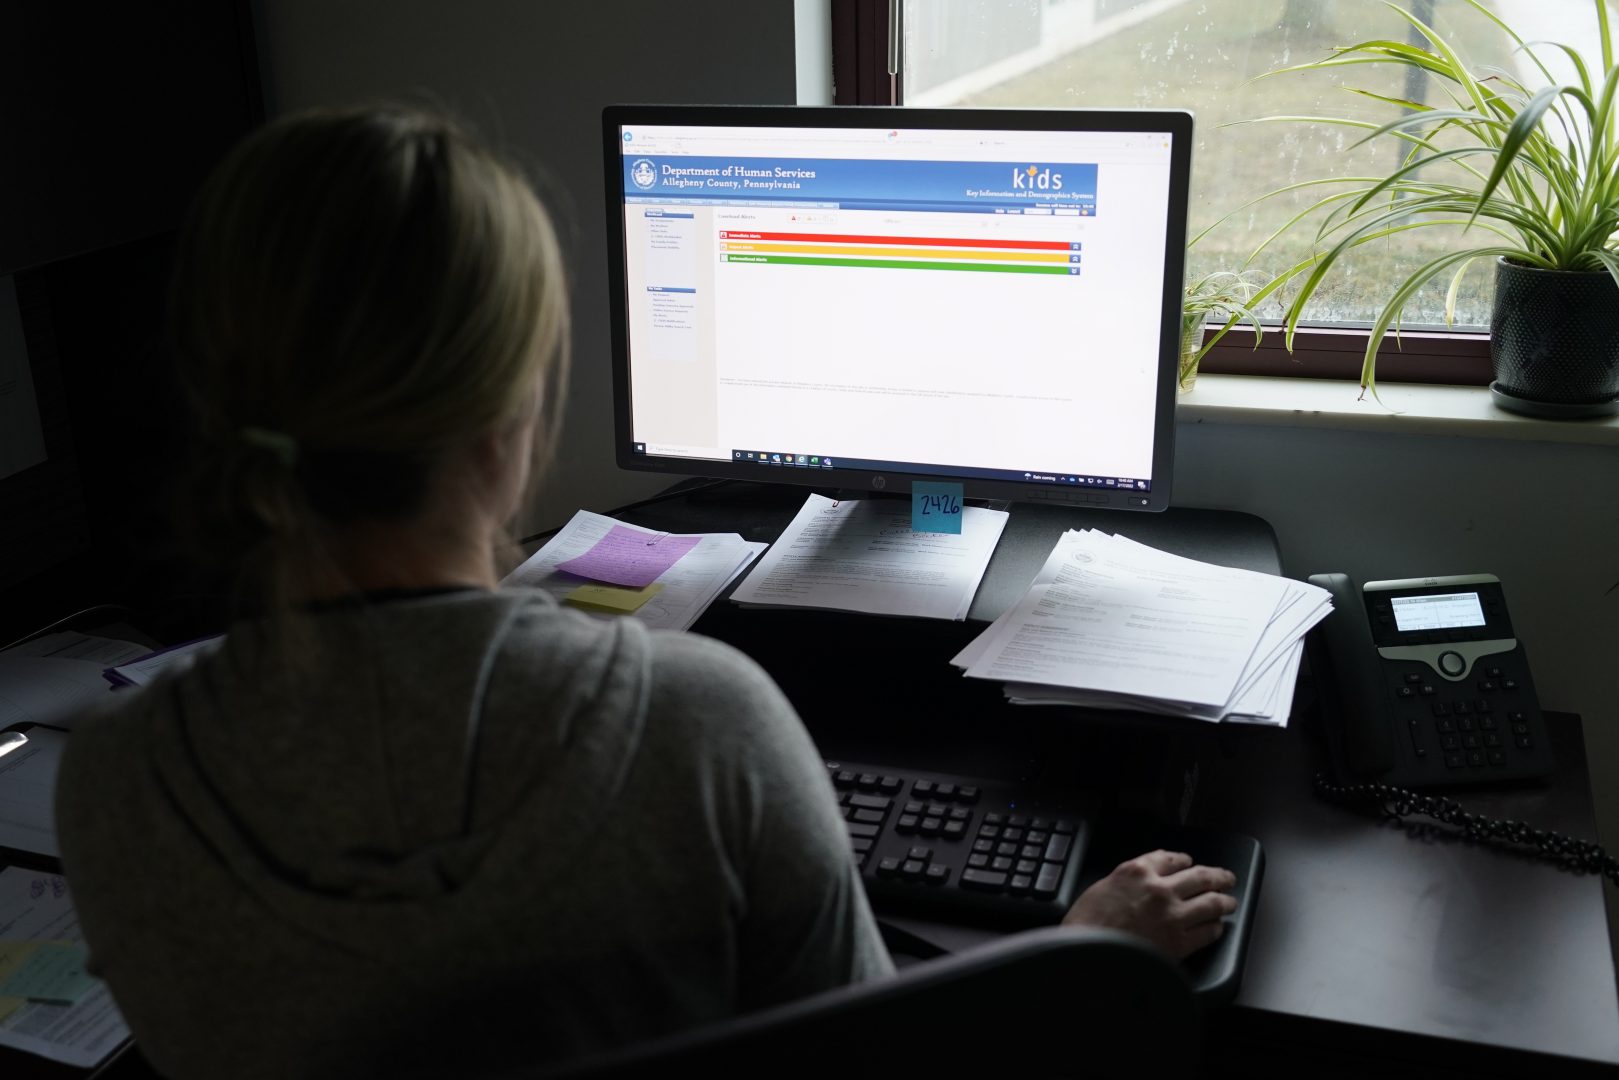 Case work supervisor Jessie Schemm looks over the first screen of software used by workers who field calls at an intake call screening center for the Allegheny County Children and Youth Services, in Penn Hills, Pa. 